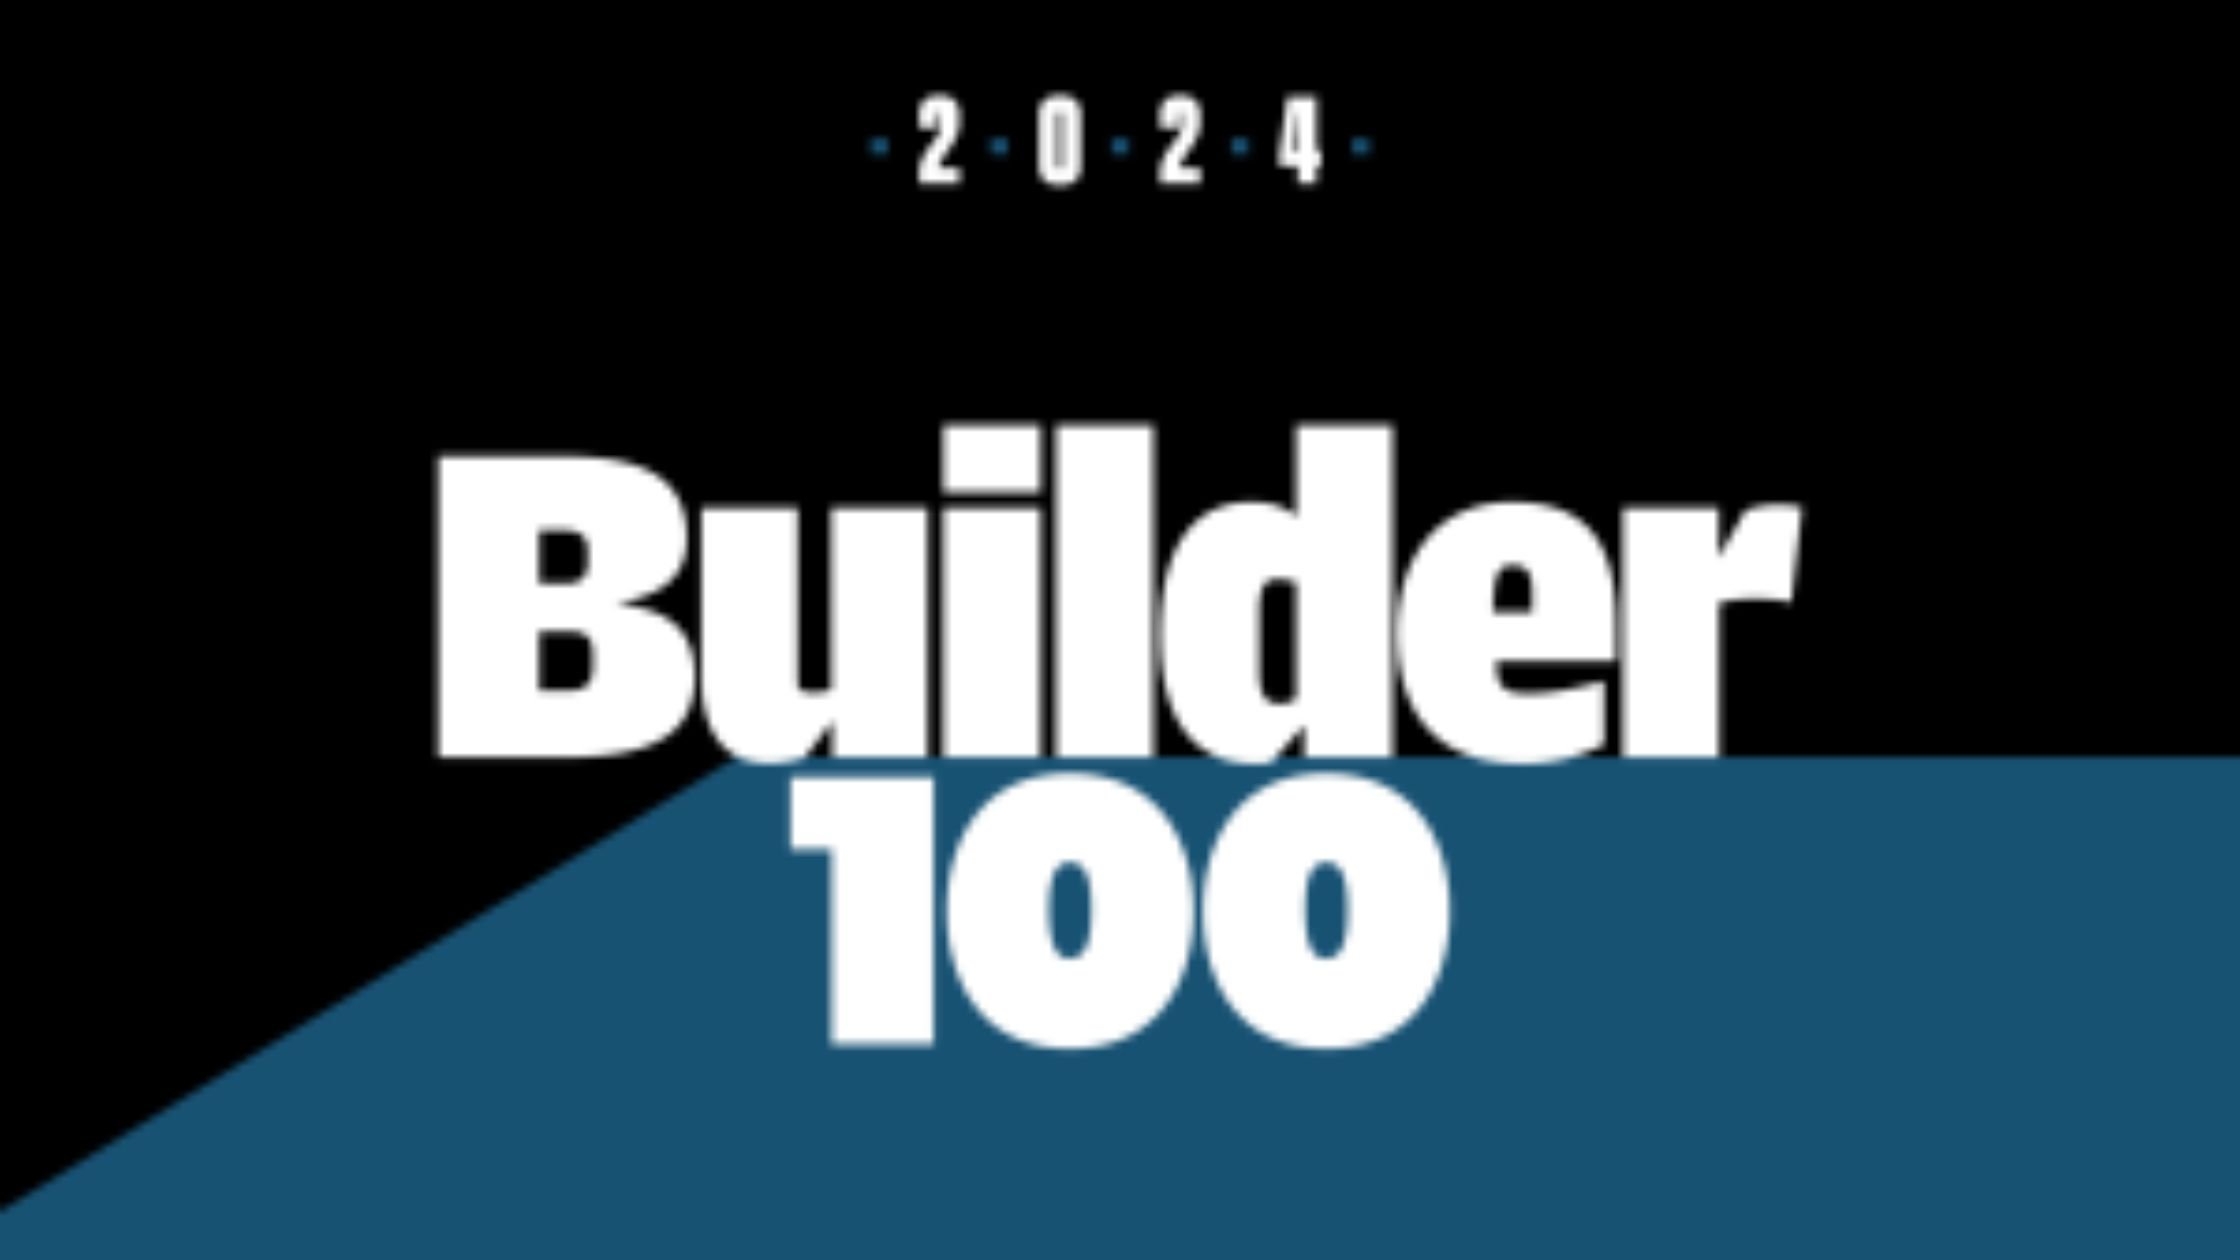 ICI Homes Ranks #83 in the 2024 Builder 100 - Builder top 100 2024